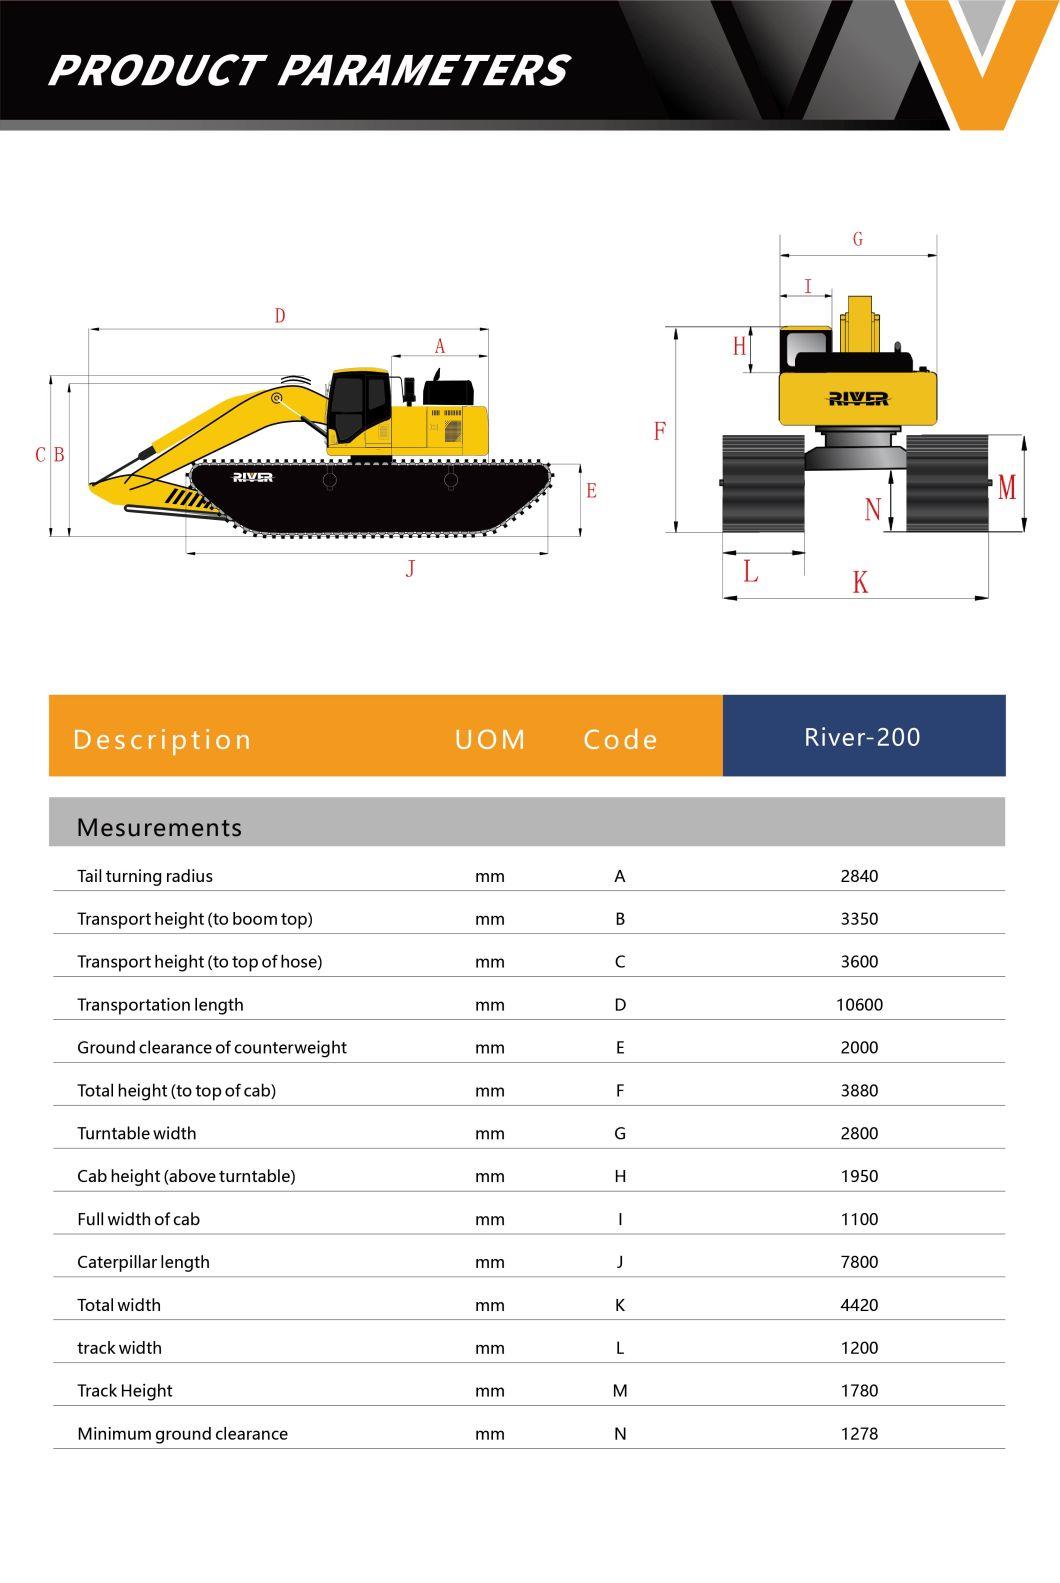 High Quality Amphibious Excavator Secondhand Cat 320c with New Pontoon Undercarriage and Long Arm